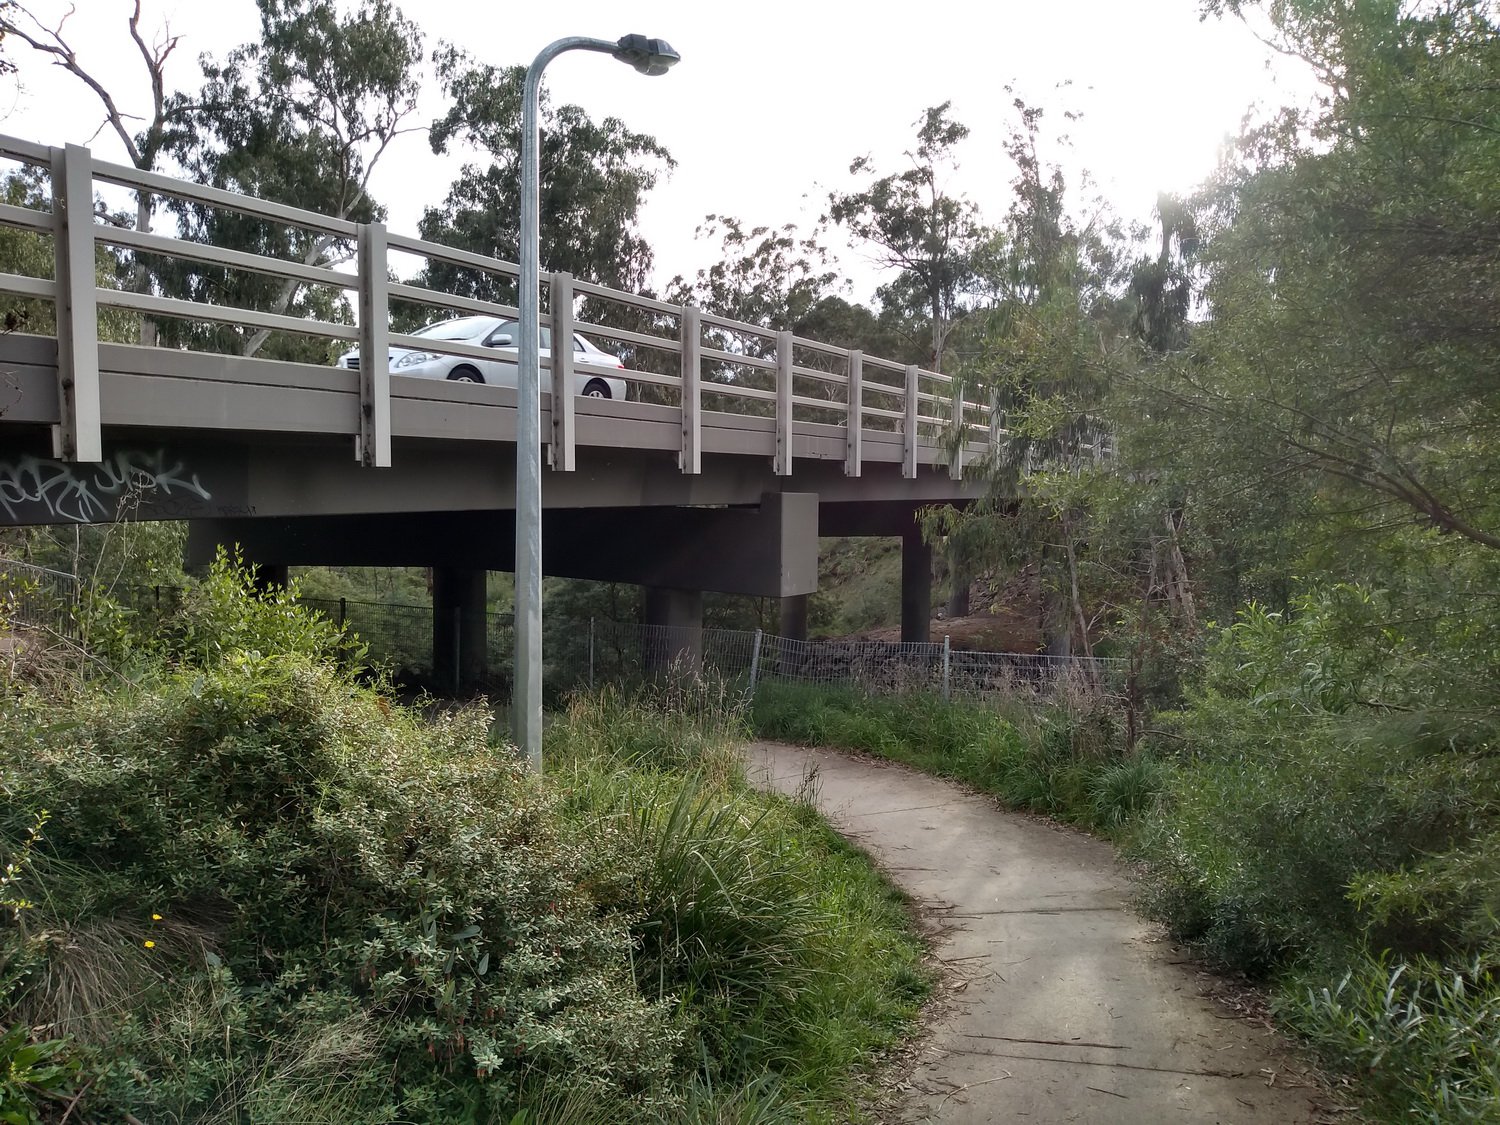 Completed bridge and path on Wattletree Road. Eltham, 2020.